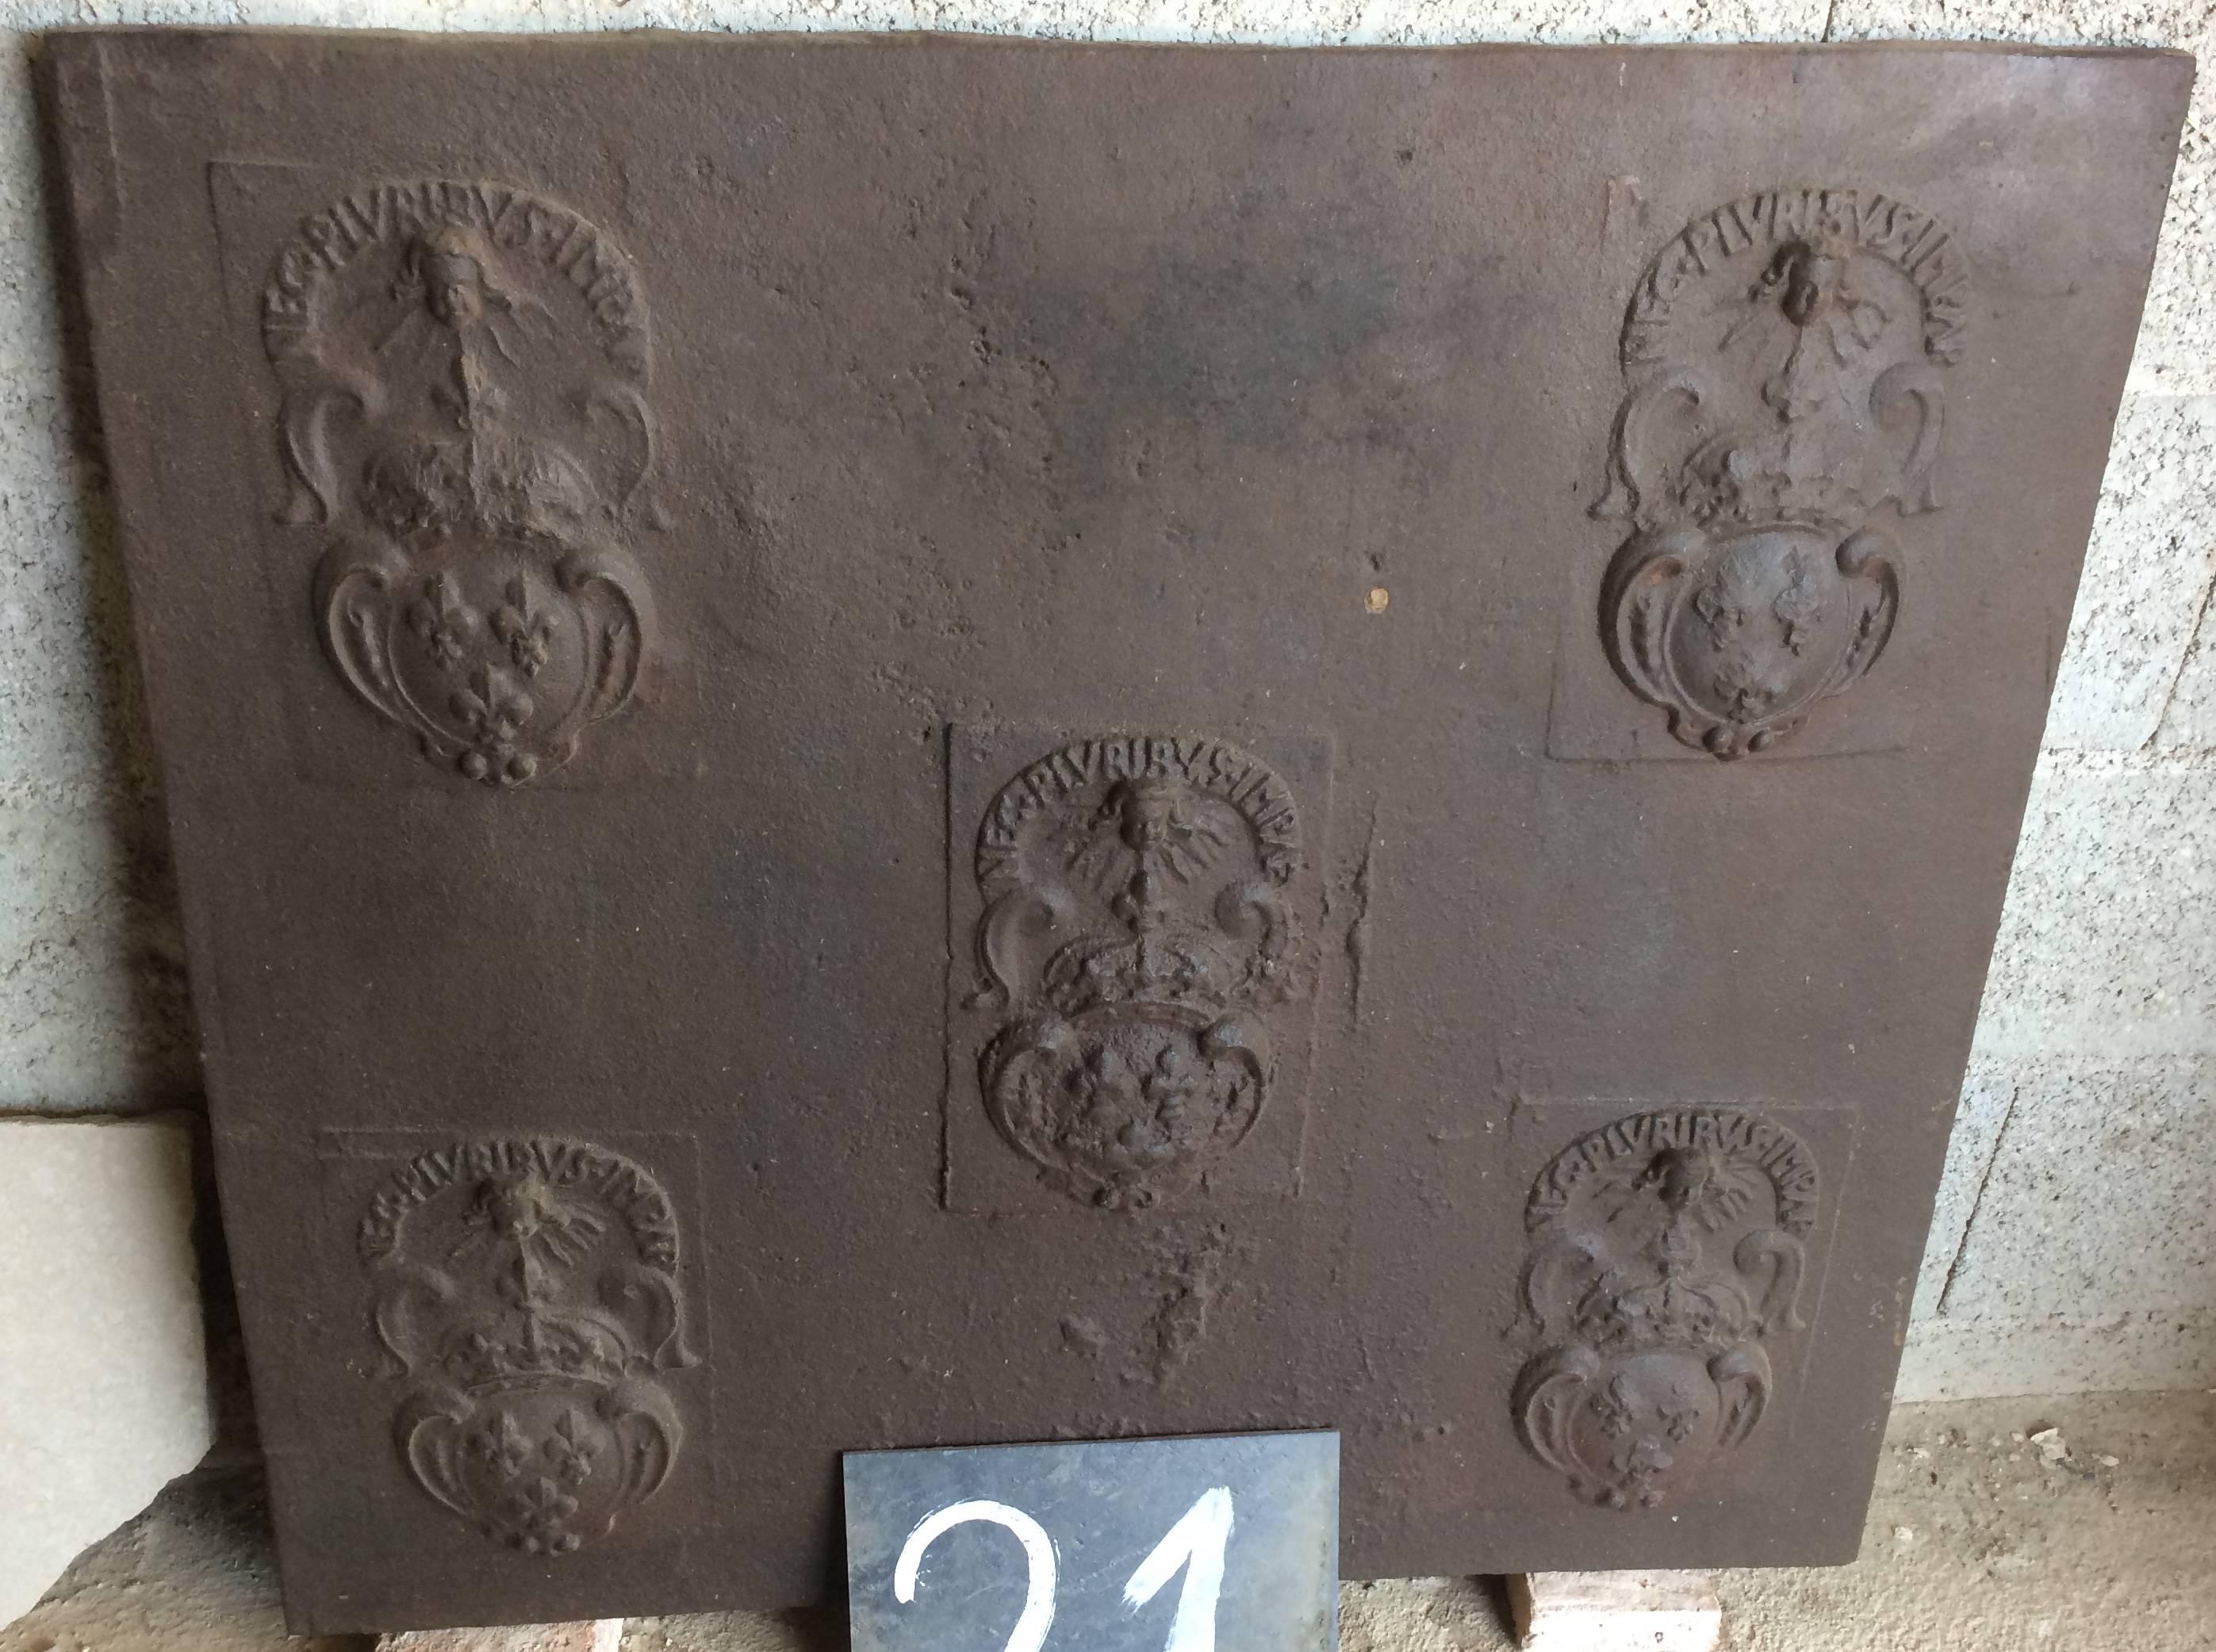 Original Large French Renaissance period antique fireback in solid iron, from the 16th century in France.
Five coats of arms representing French legacy.
Beautiful quality of Art-work from the French Renaissance/Louis XIII period.

It was used as